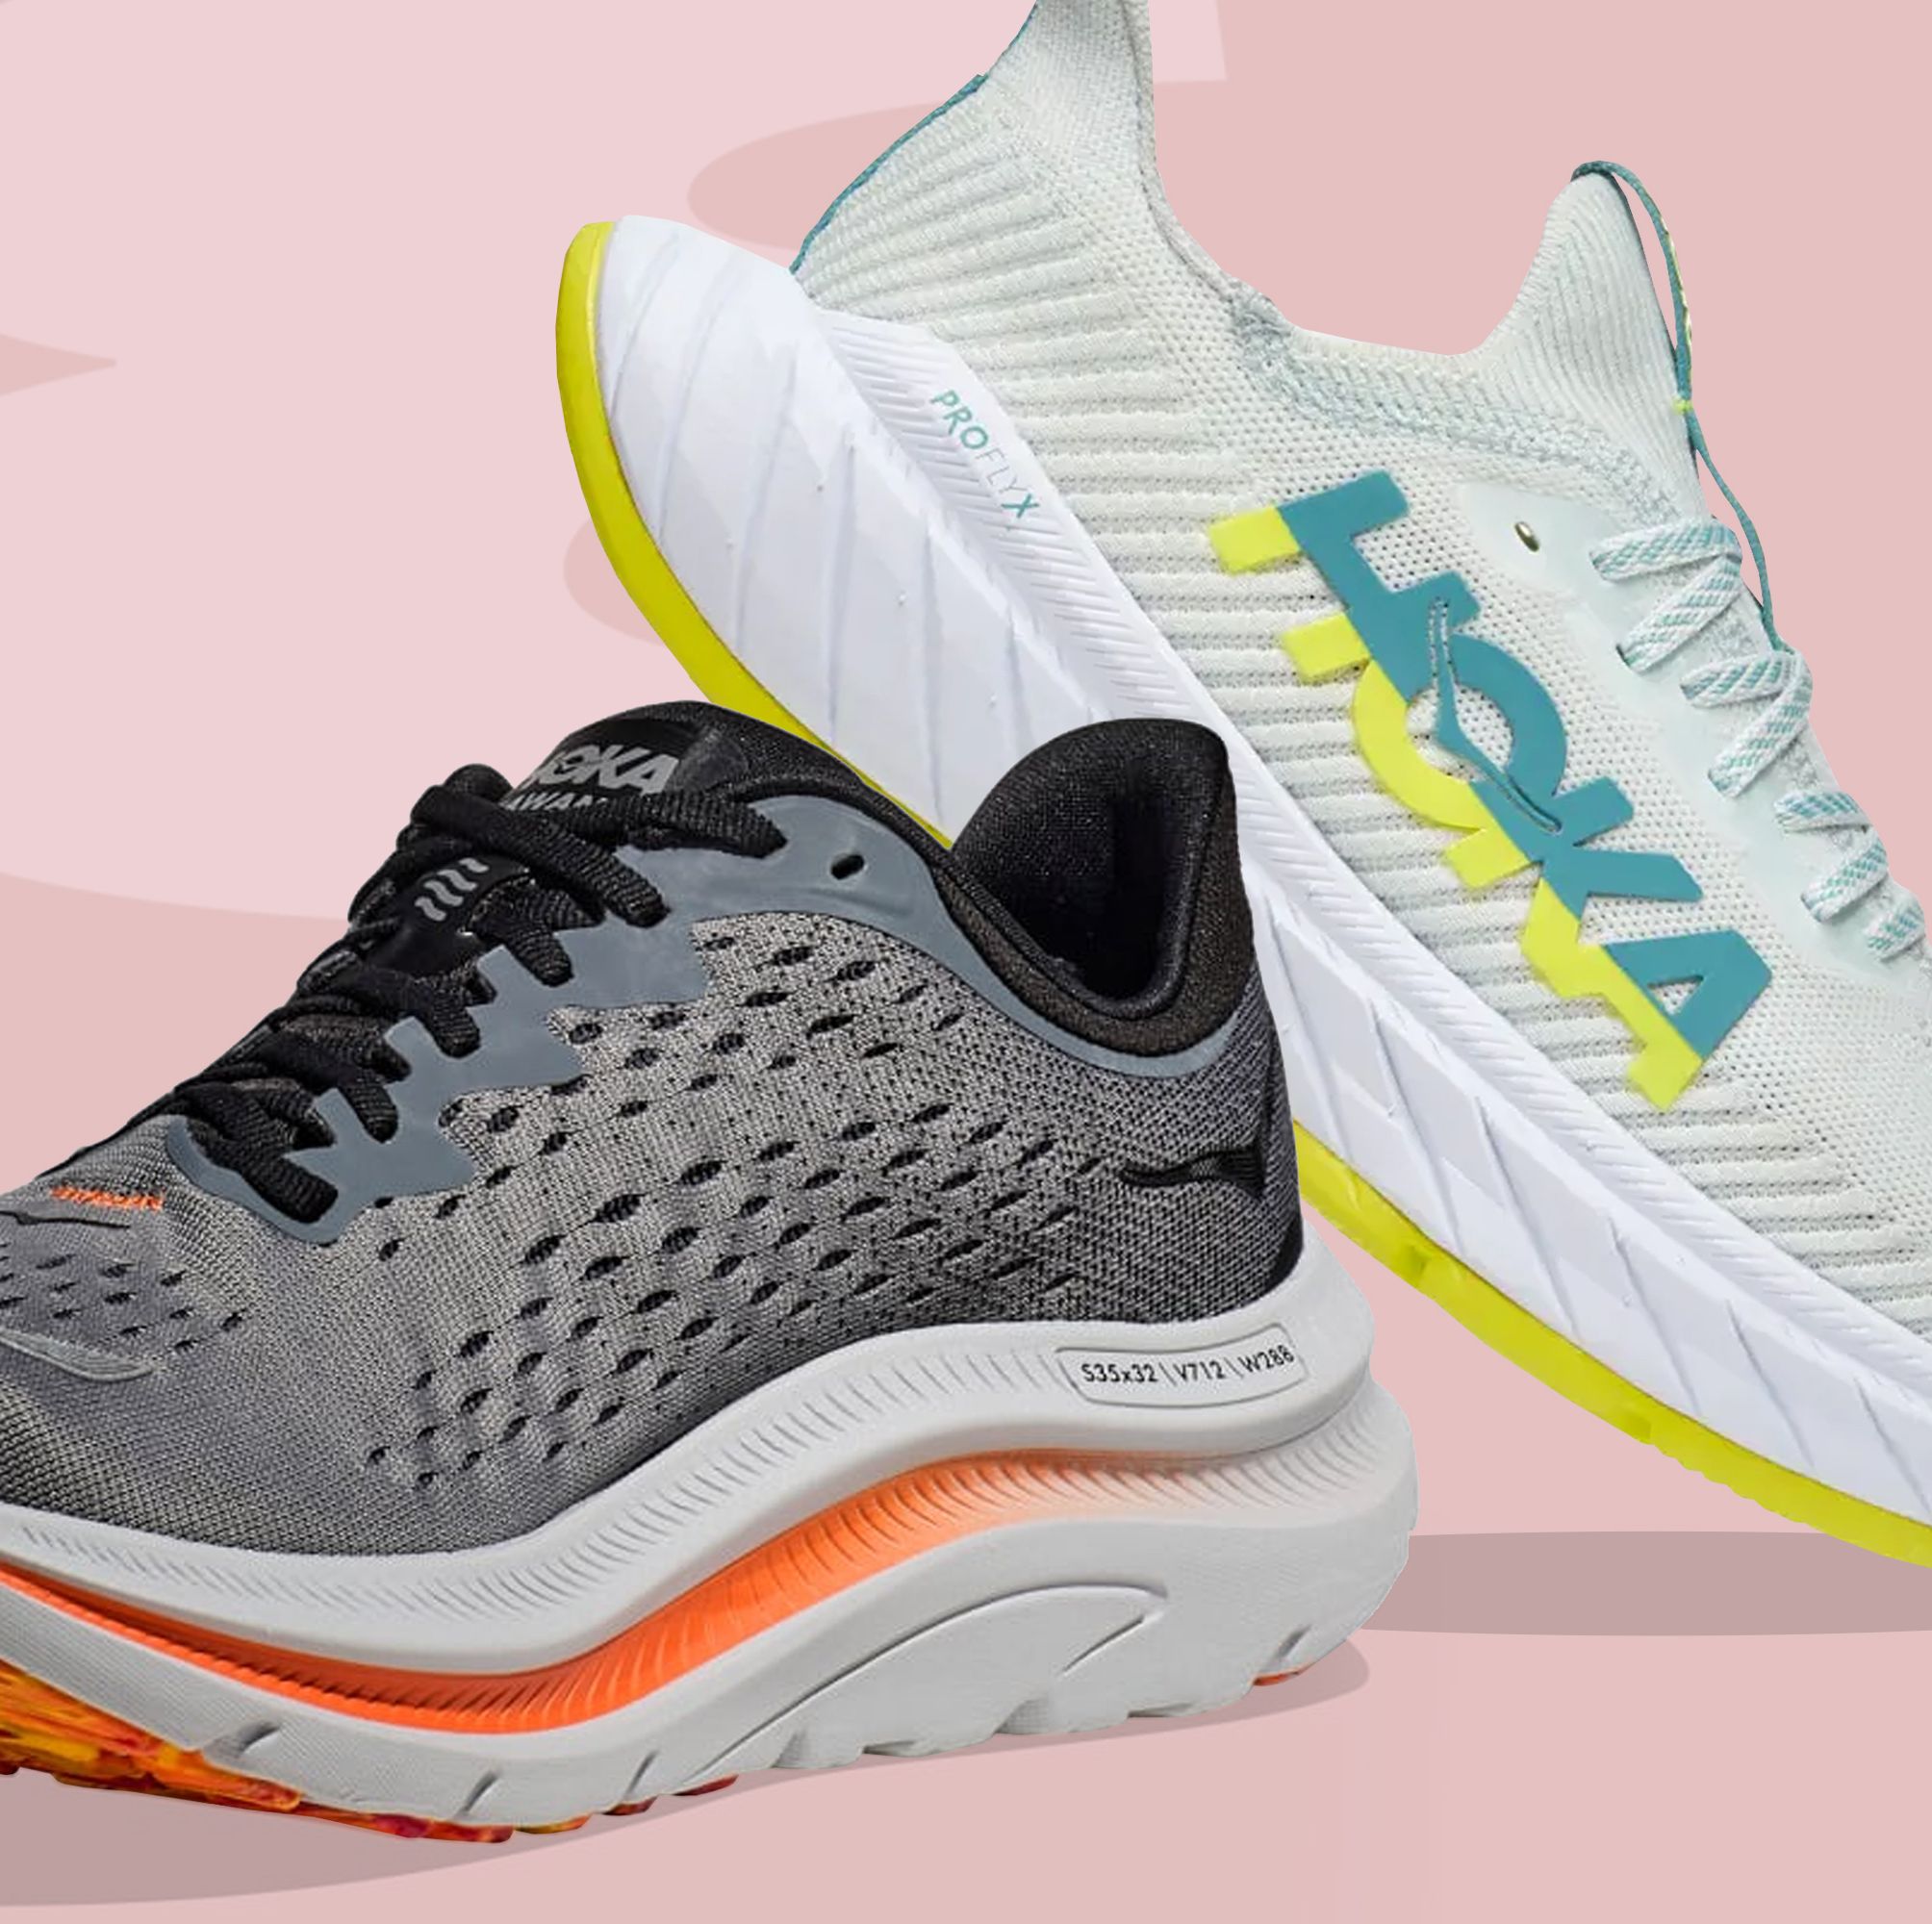 You Can Save Up to 34% On a New Pair of Hokas Right Now